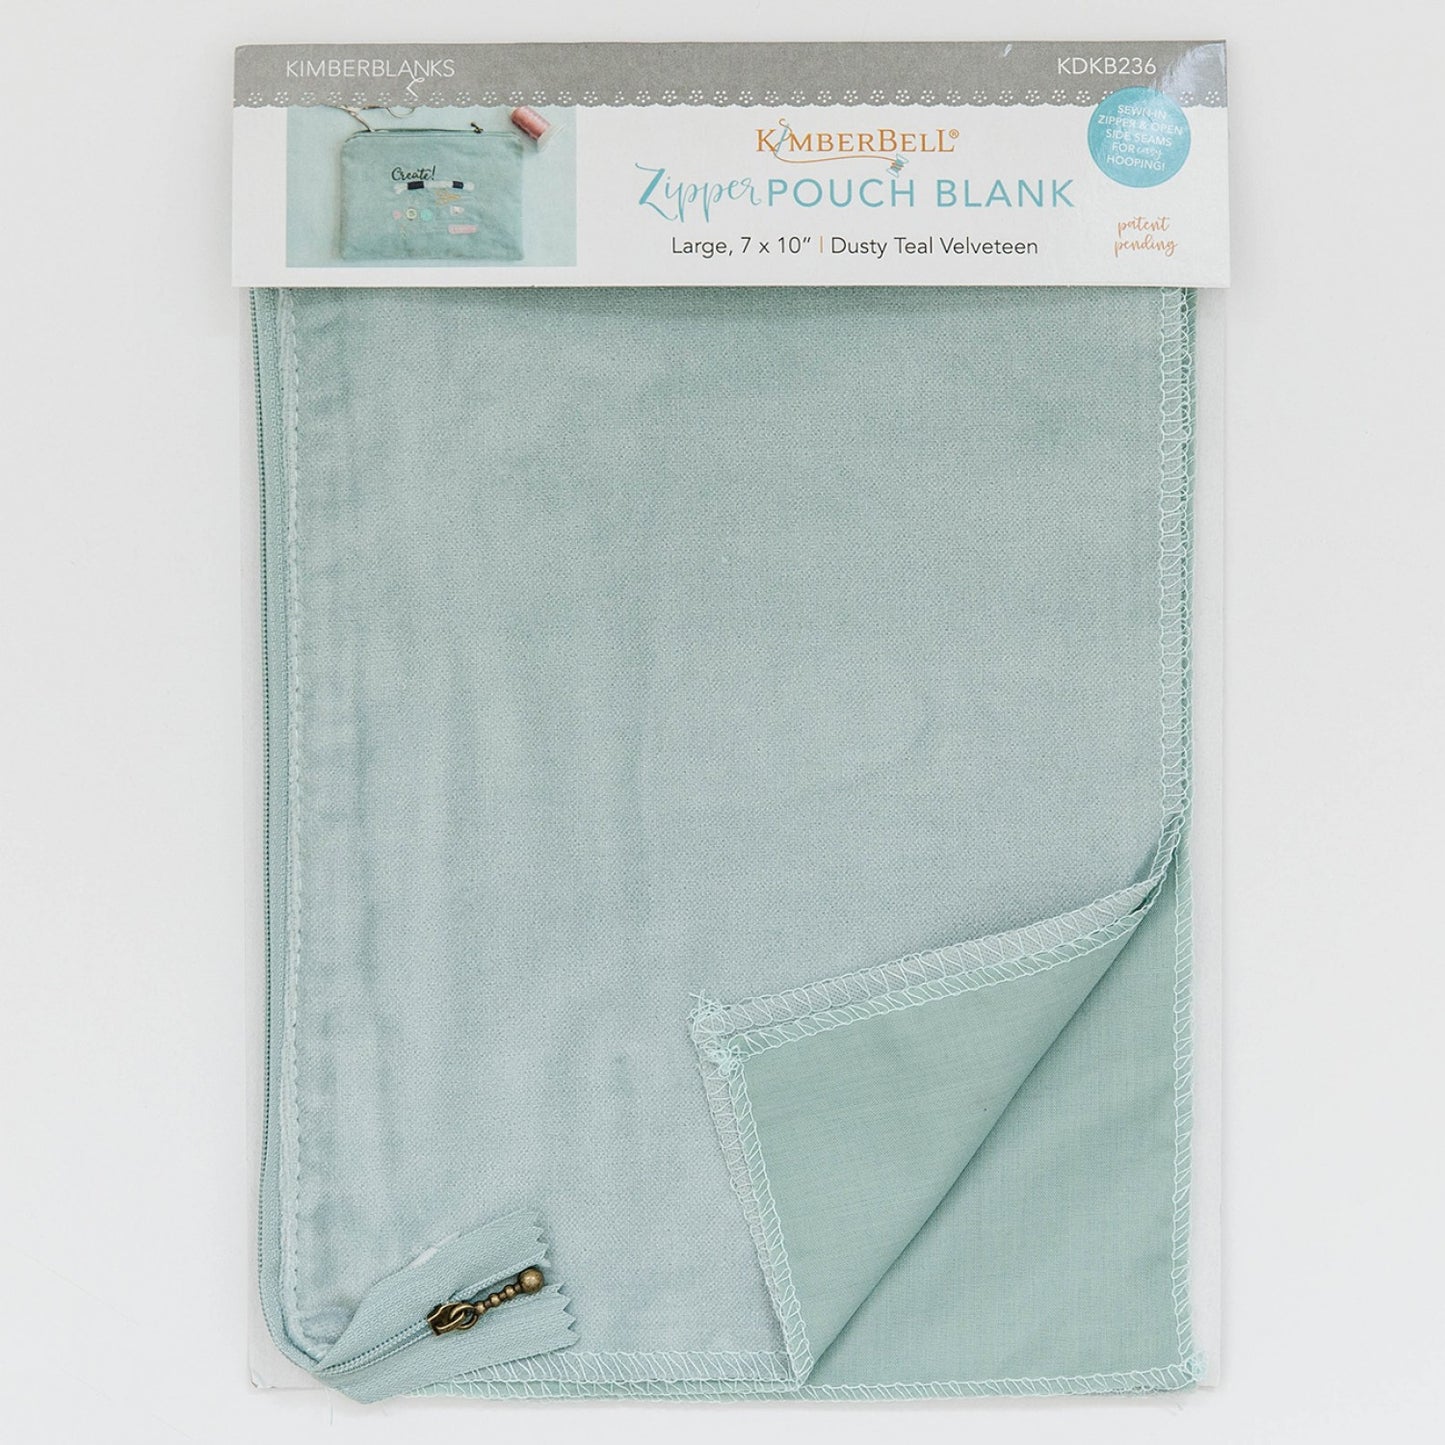 Kimberbell Zipper Pouch Blank *Special Order*